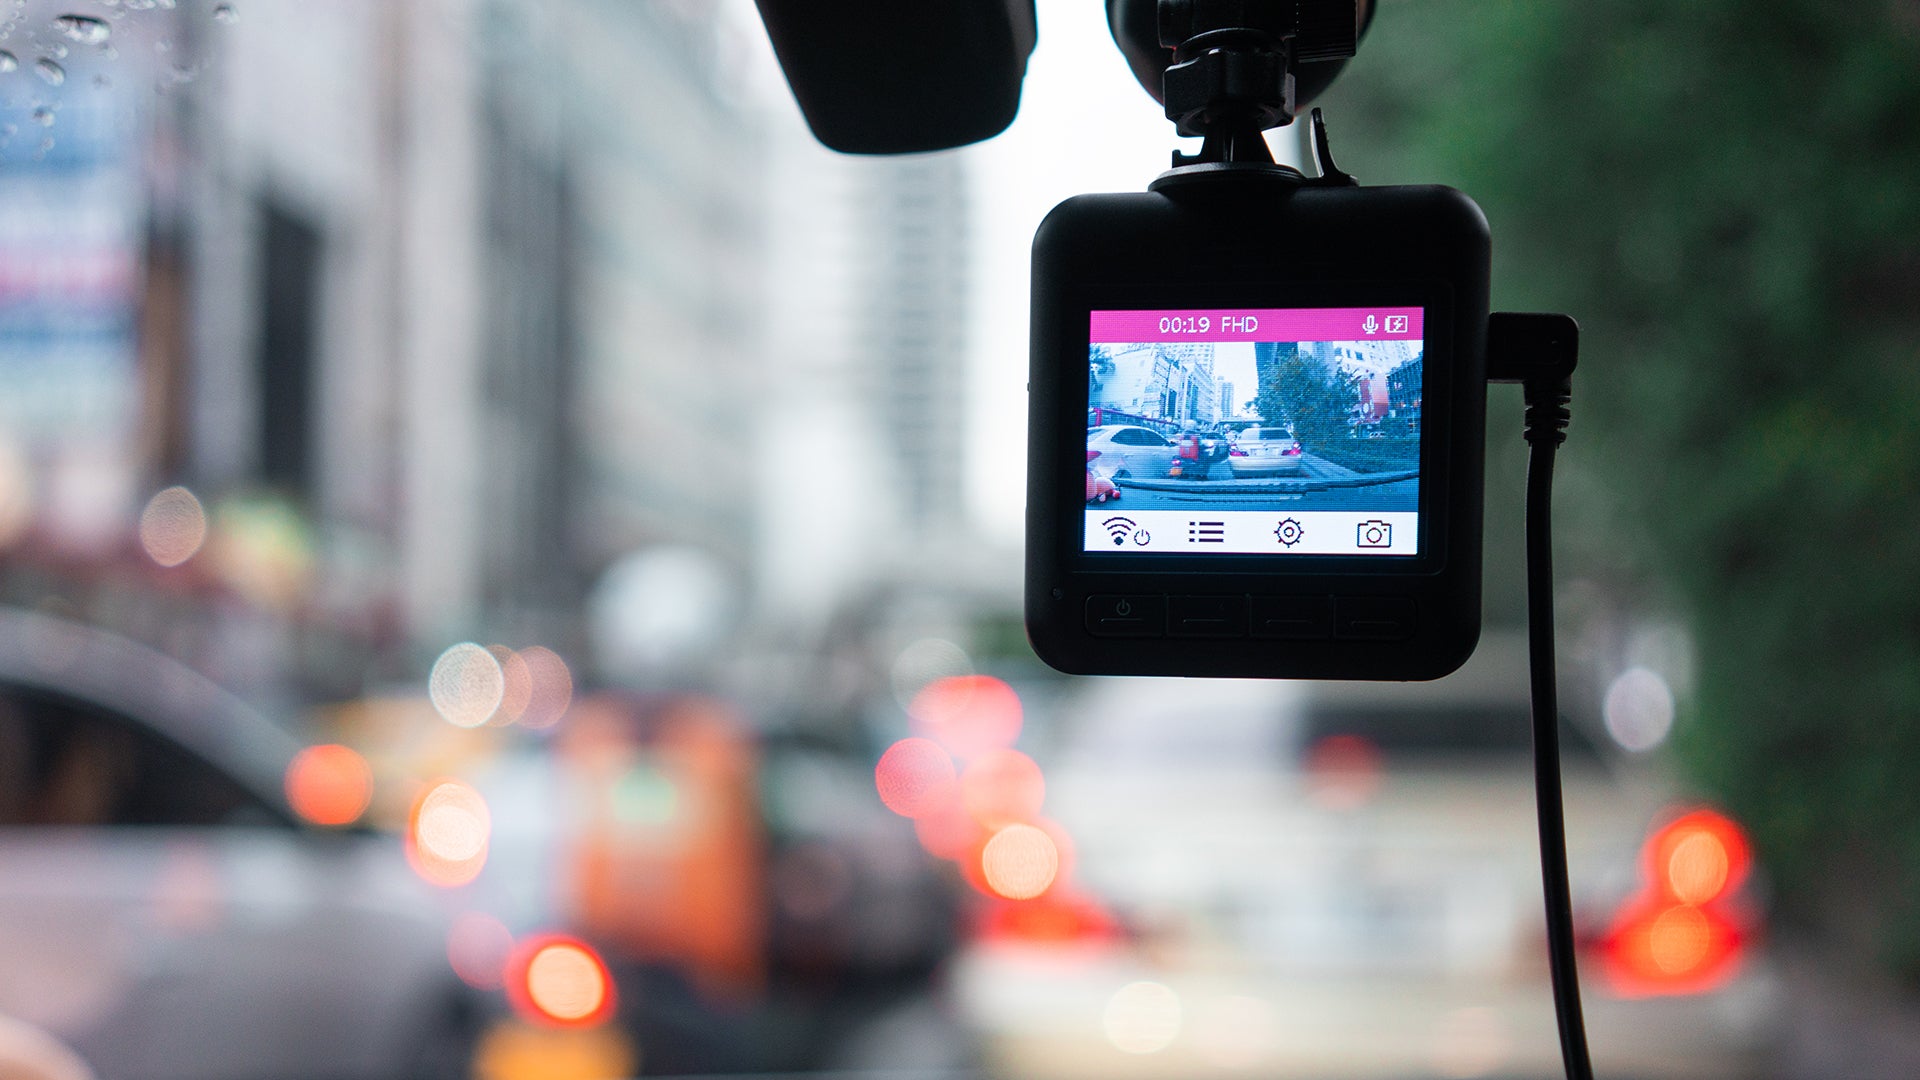 The 10 Best Dash Cameras Reviews & Comparison - Glory Cycles